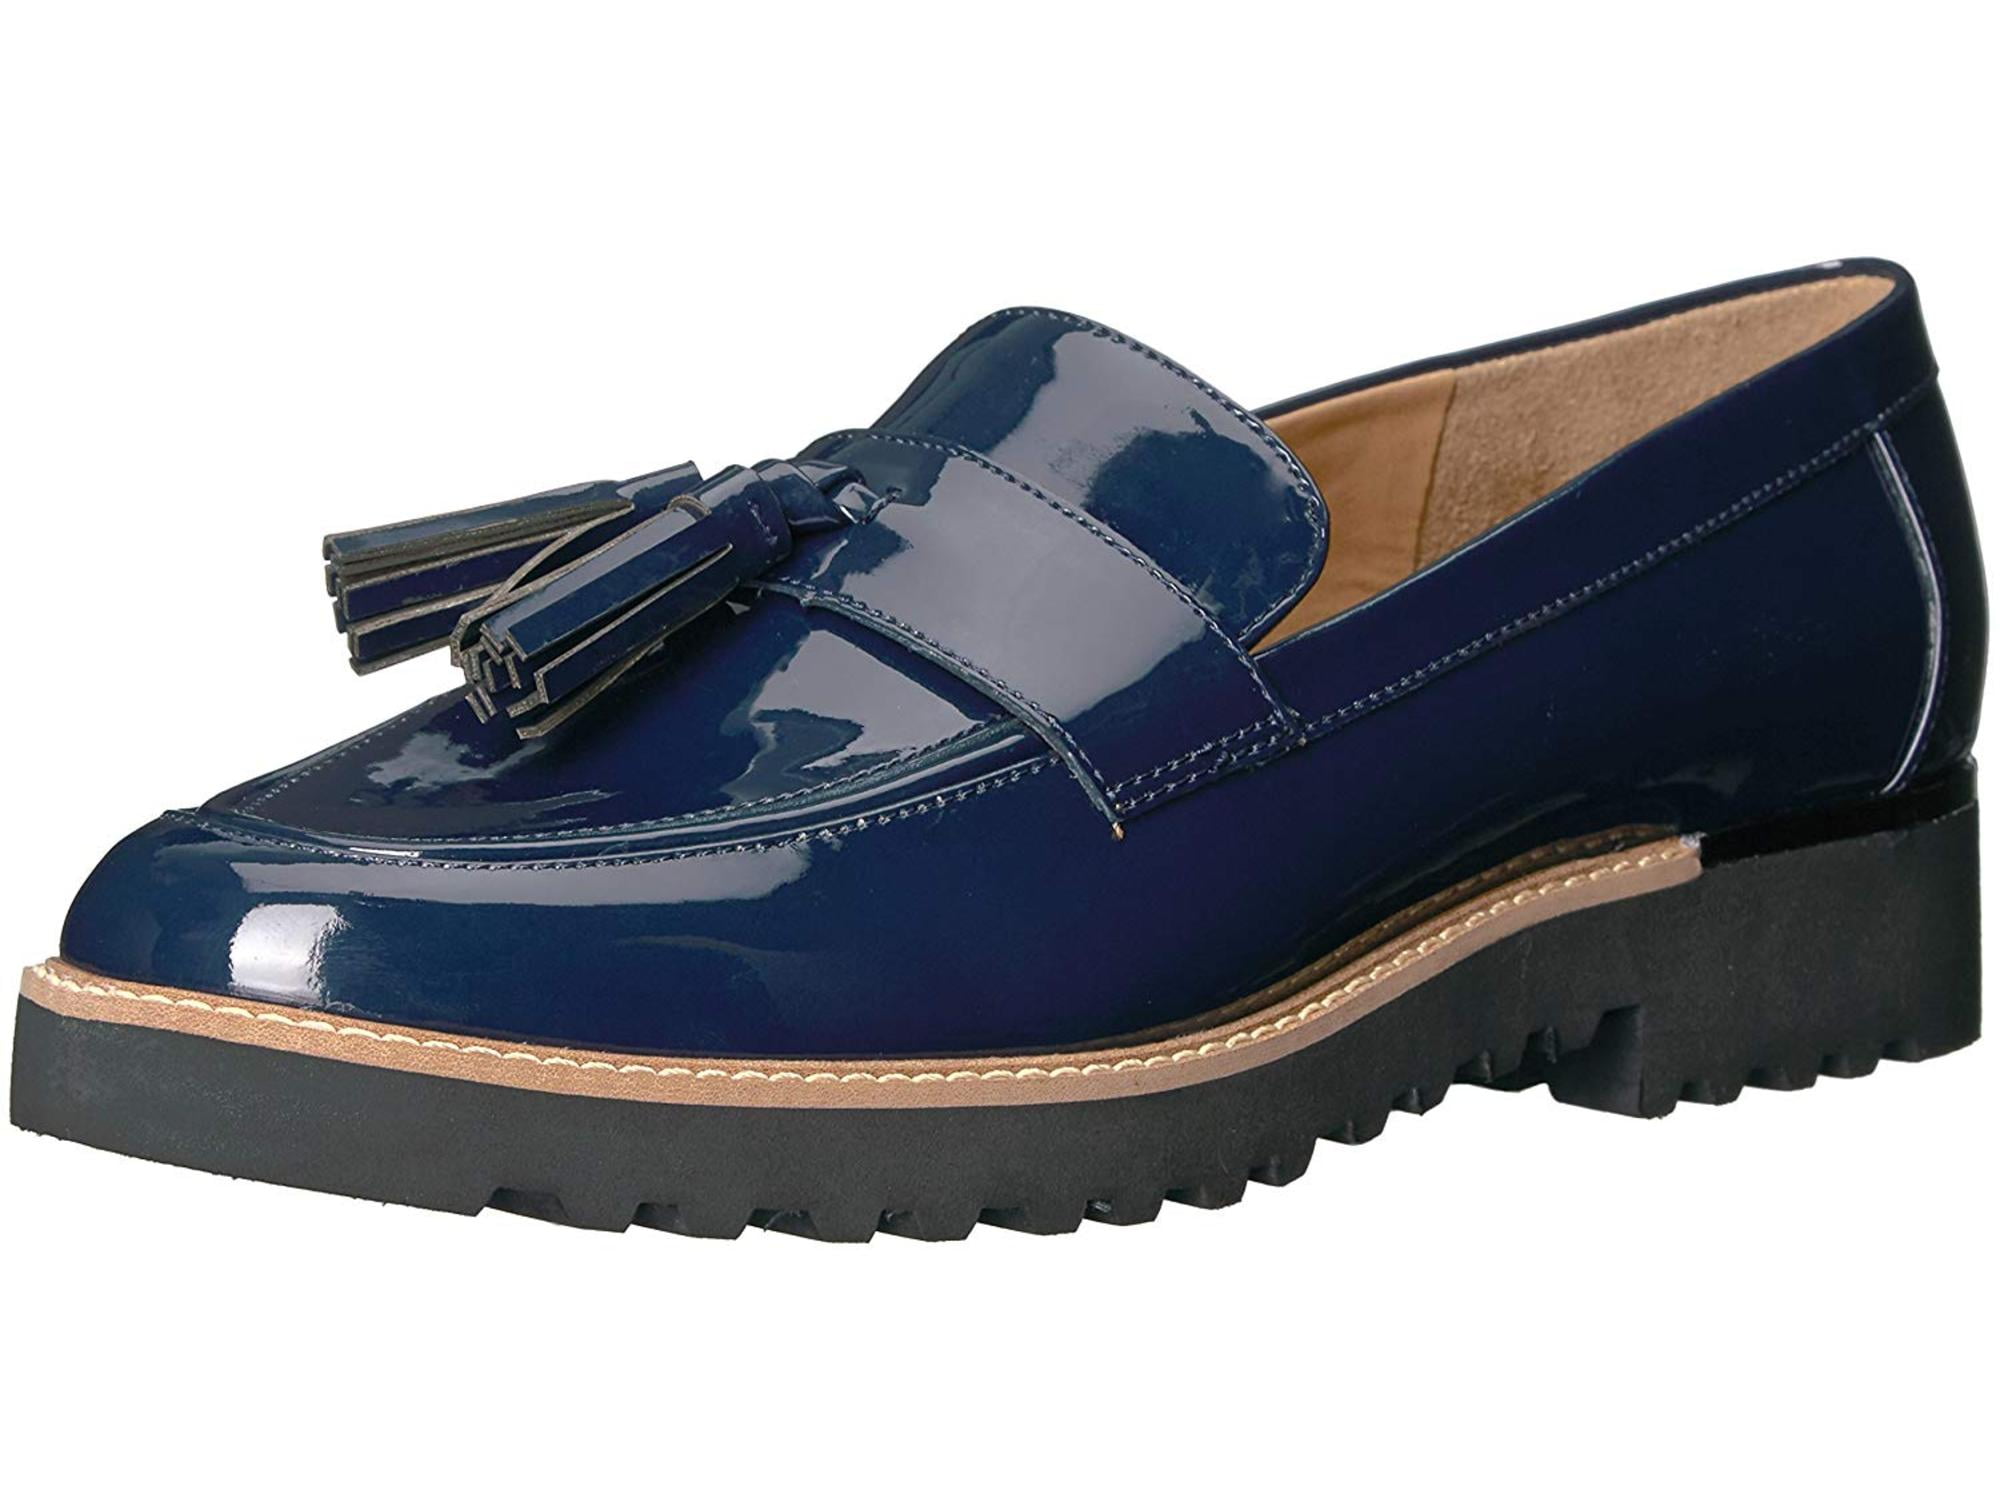 franco sarto leather loafers